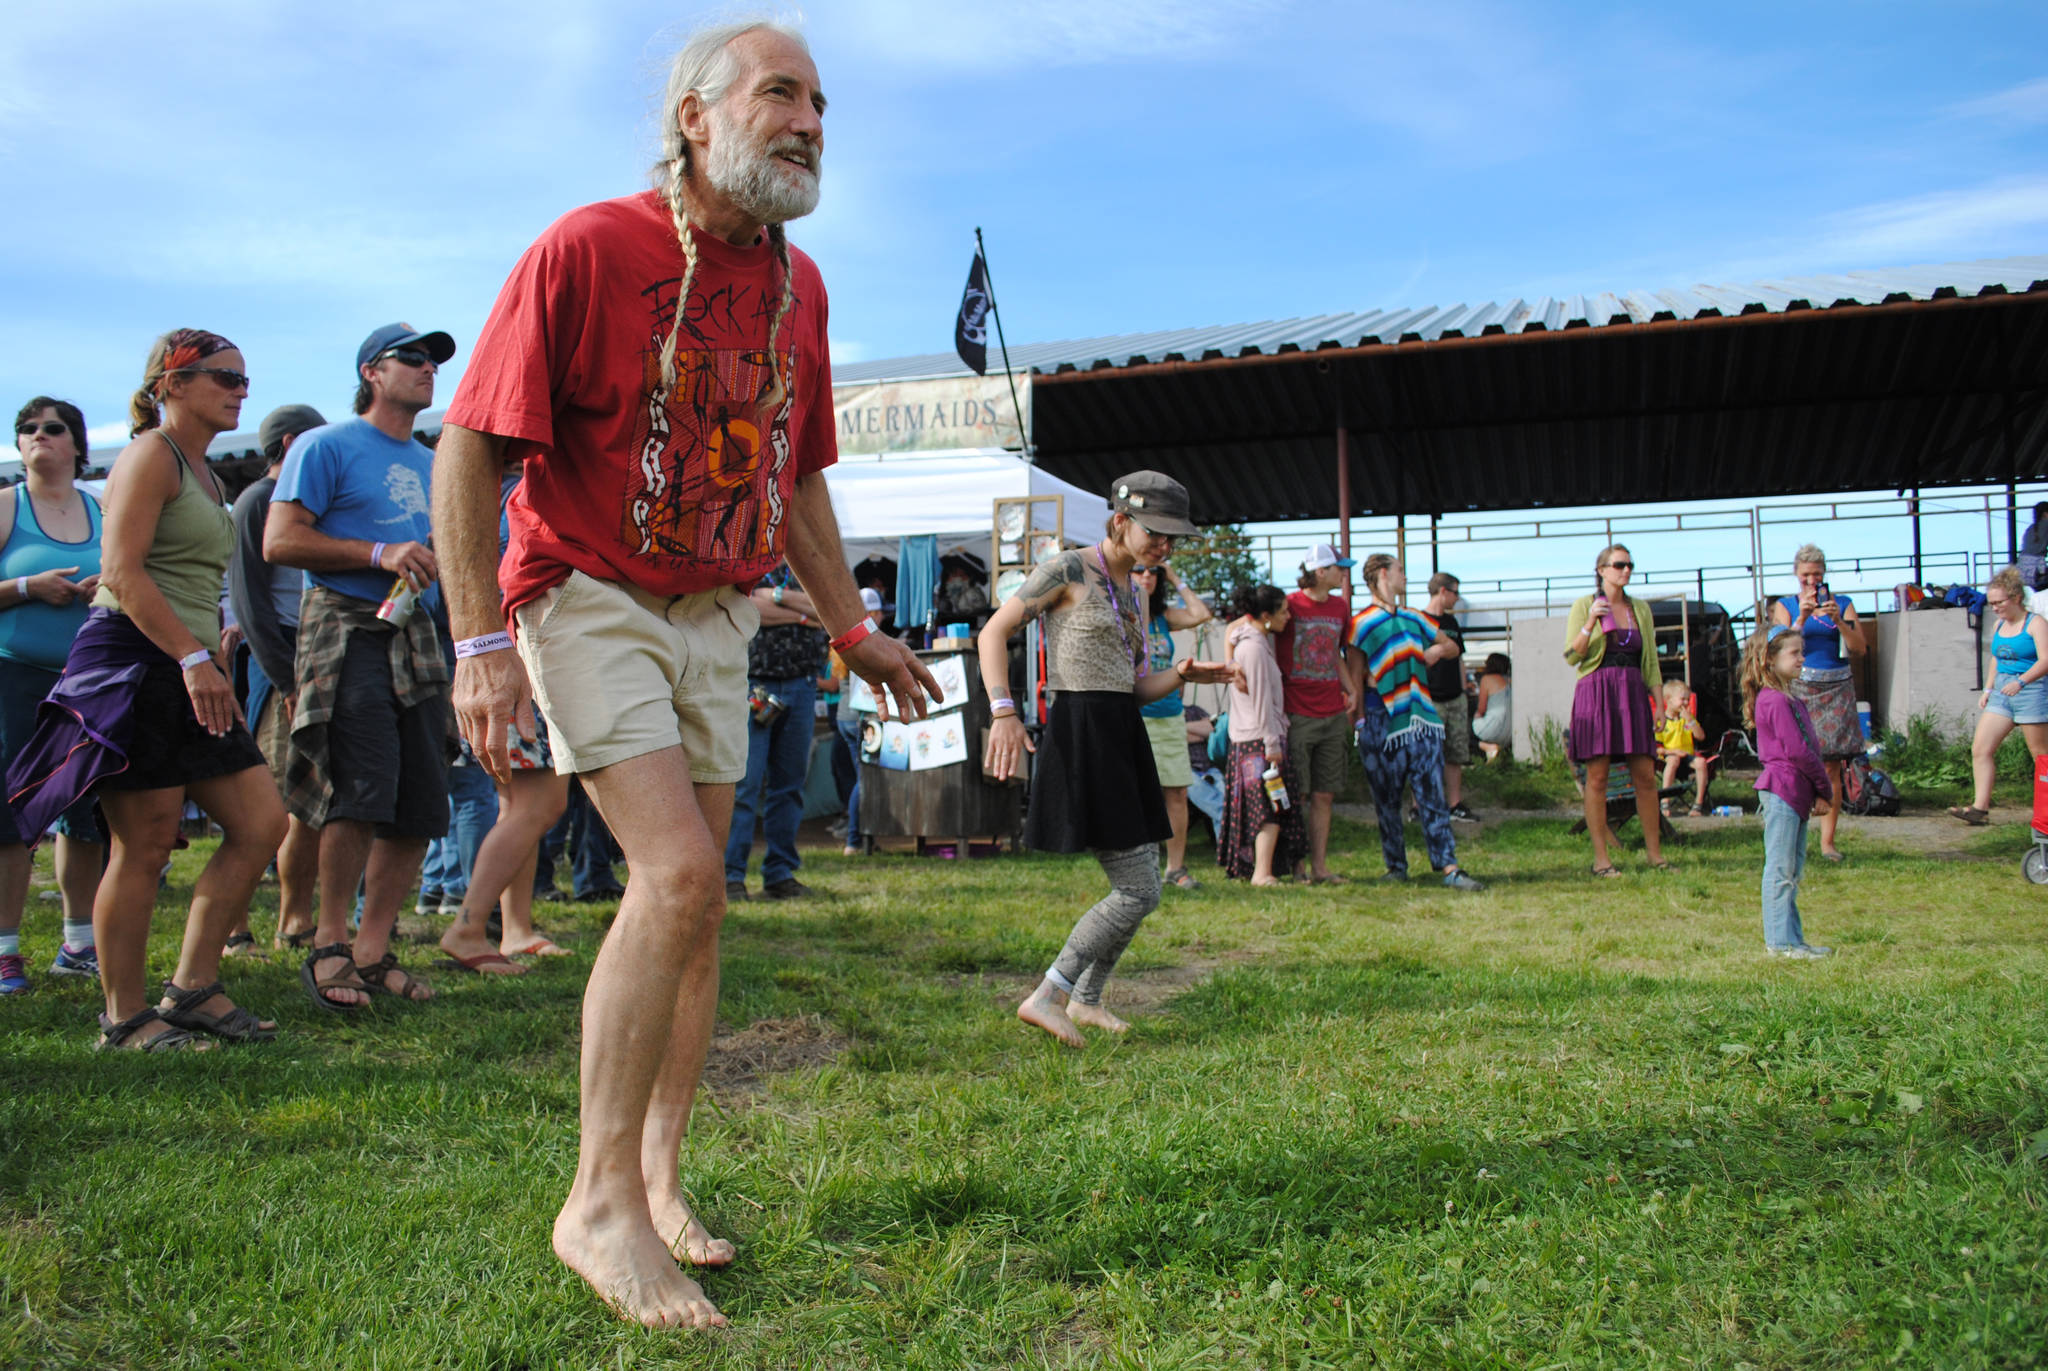 Stu Schulitz dances at the River Stage during Rabbit Creek Ramblers’ set at the 2017 Salmonfest in Ninilchik, Alaska on Friday, August 4, 2017. (Photo by Kat Sorensen/Peninsula Clarion)